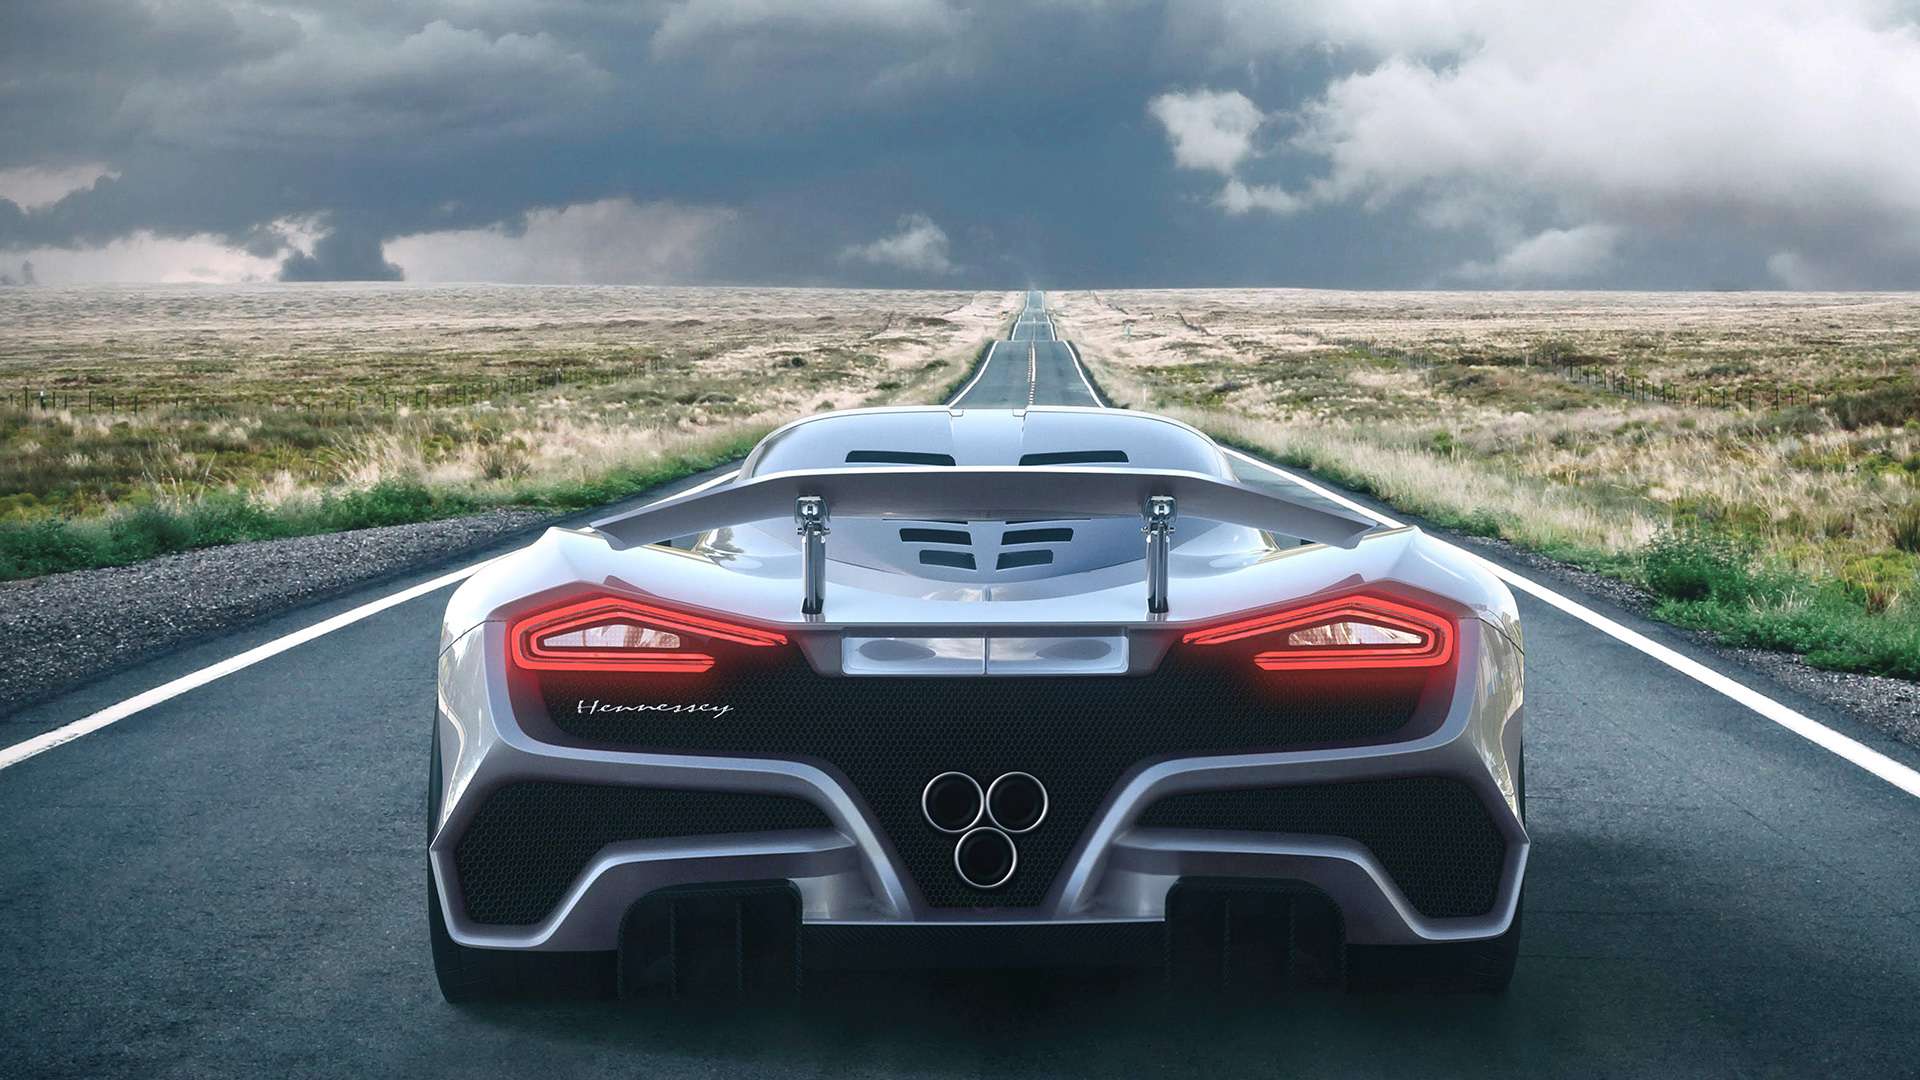 Hennessy Car Company Logo - The Hennessey Venom F5 Is America's 1,600-HP, 301-MPH Hypercar - The ...